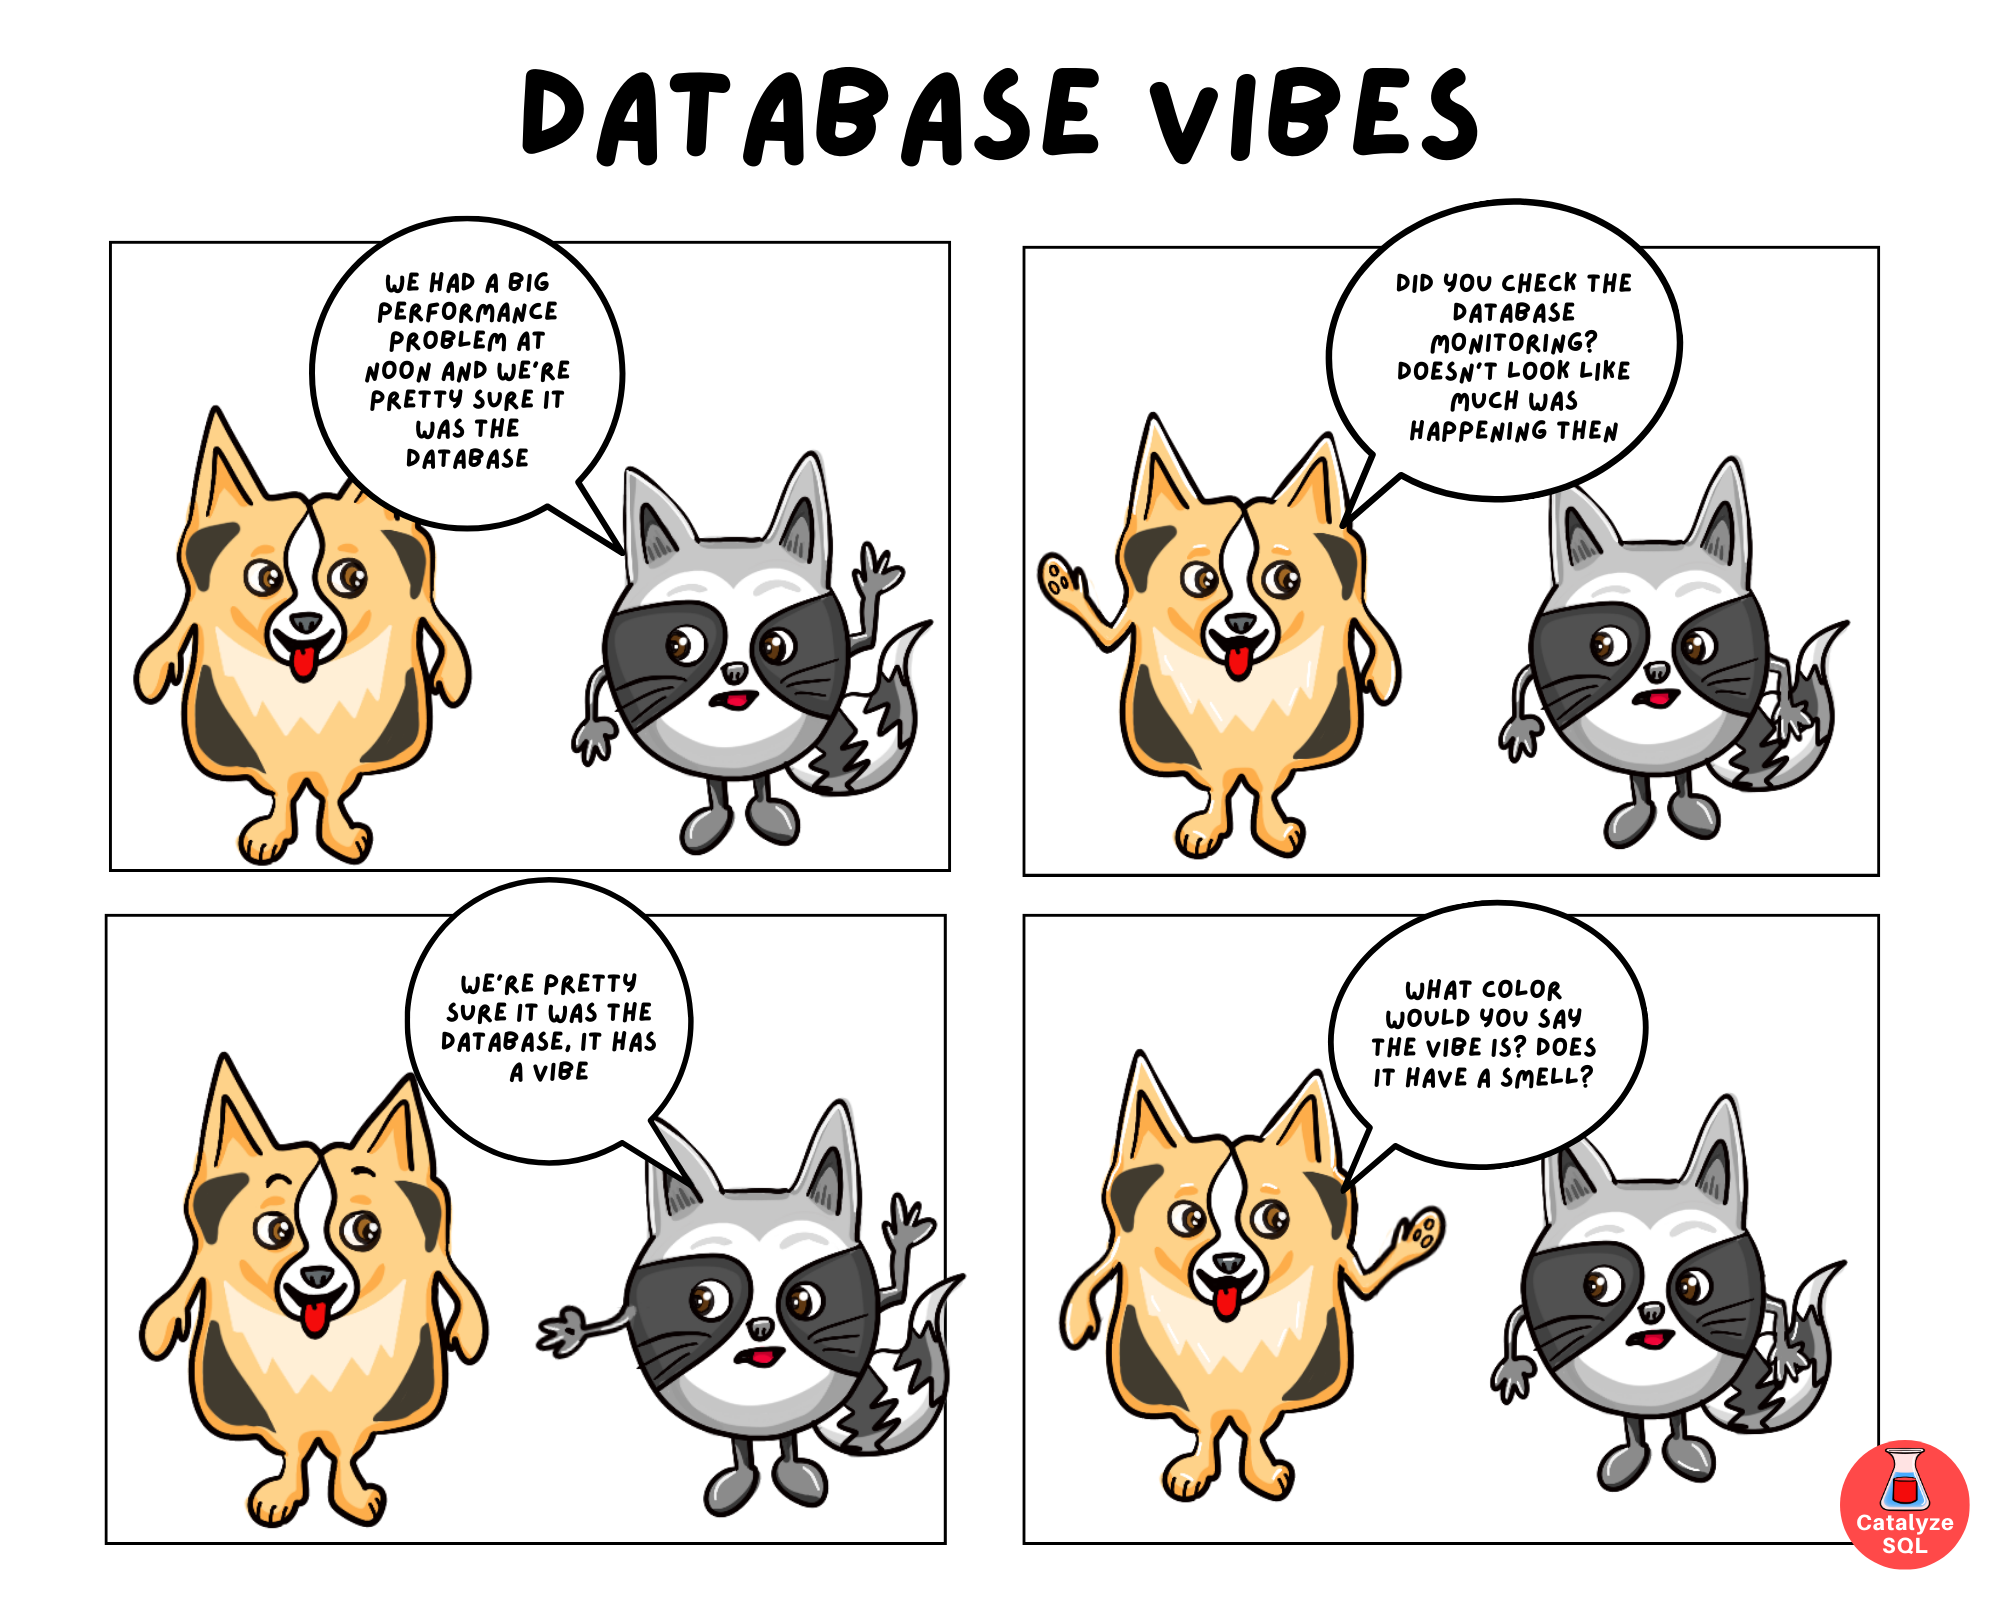 Four panel cartoon titled Database Vibes. A raccoon asks a corgi about a perf problem at noon, they were pretty sure it was the database. The corgi asks if they checked monitoring, because not much was happening then. The raccoon says they are pretty sure it's the database, it has a vibe. The corgi asks what color they would say the vibe is, and if it has a smell?